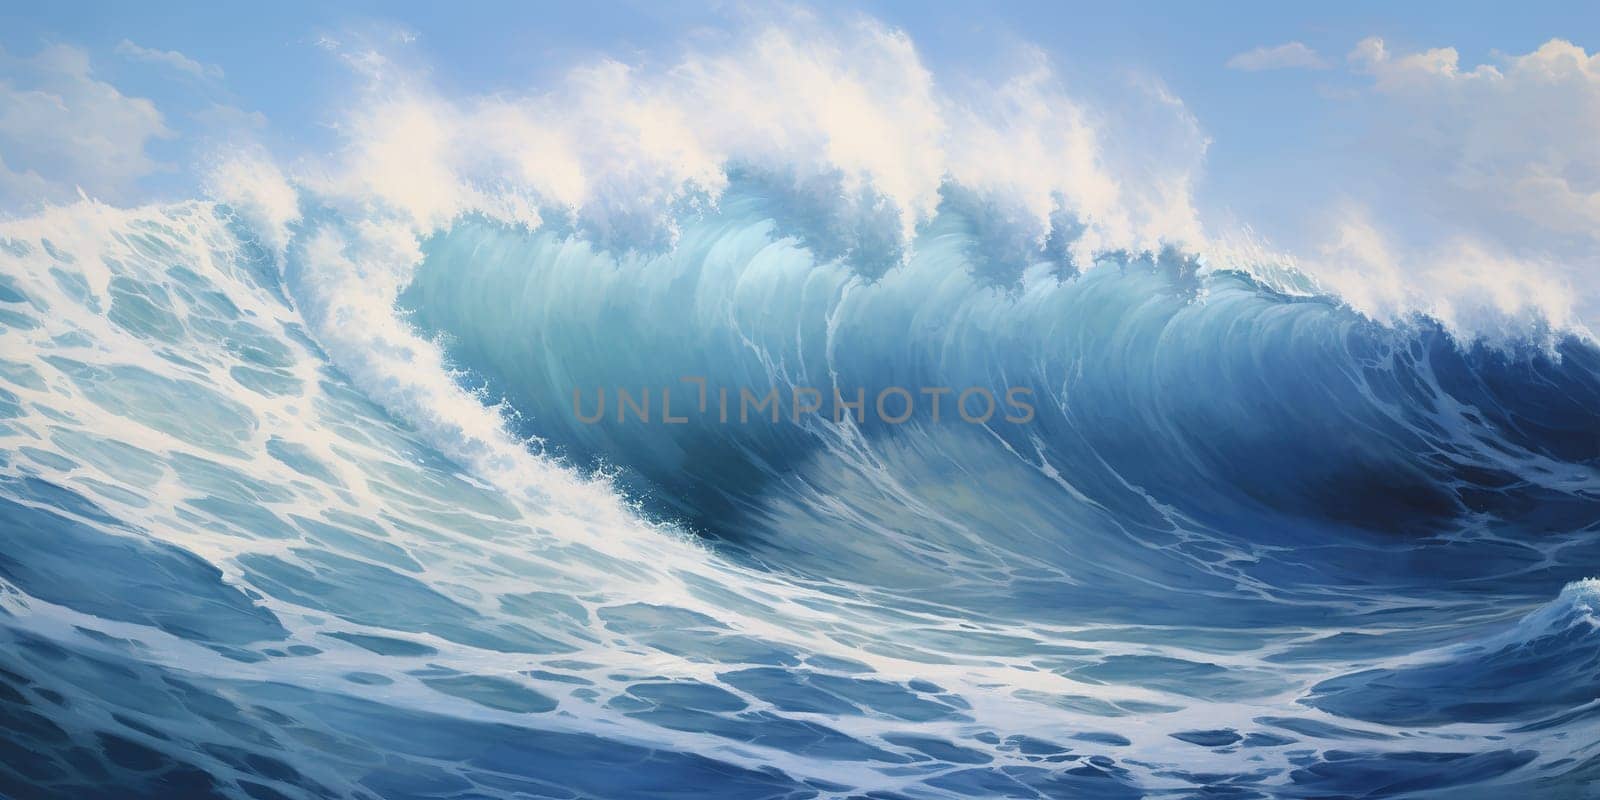 Stormy sea wave, a long body of water curling into an arched form and breaking on the shore by Kadula